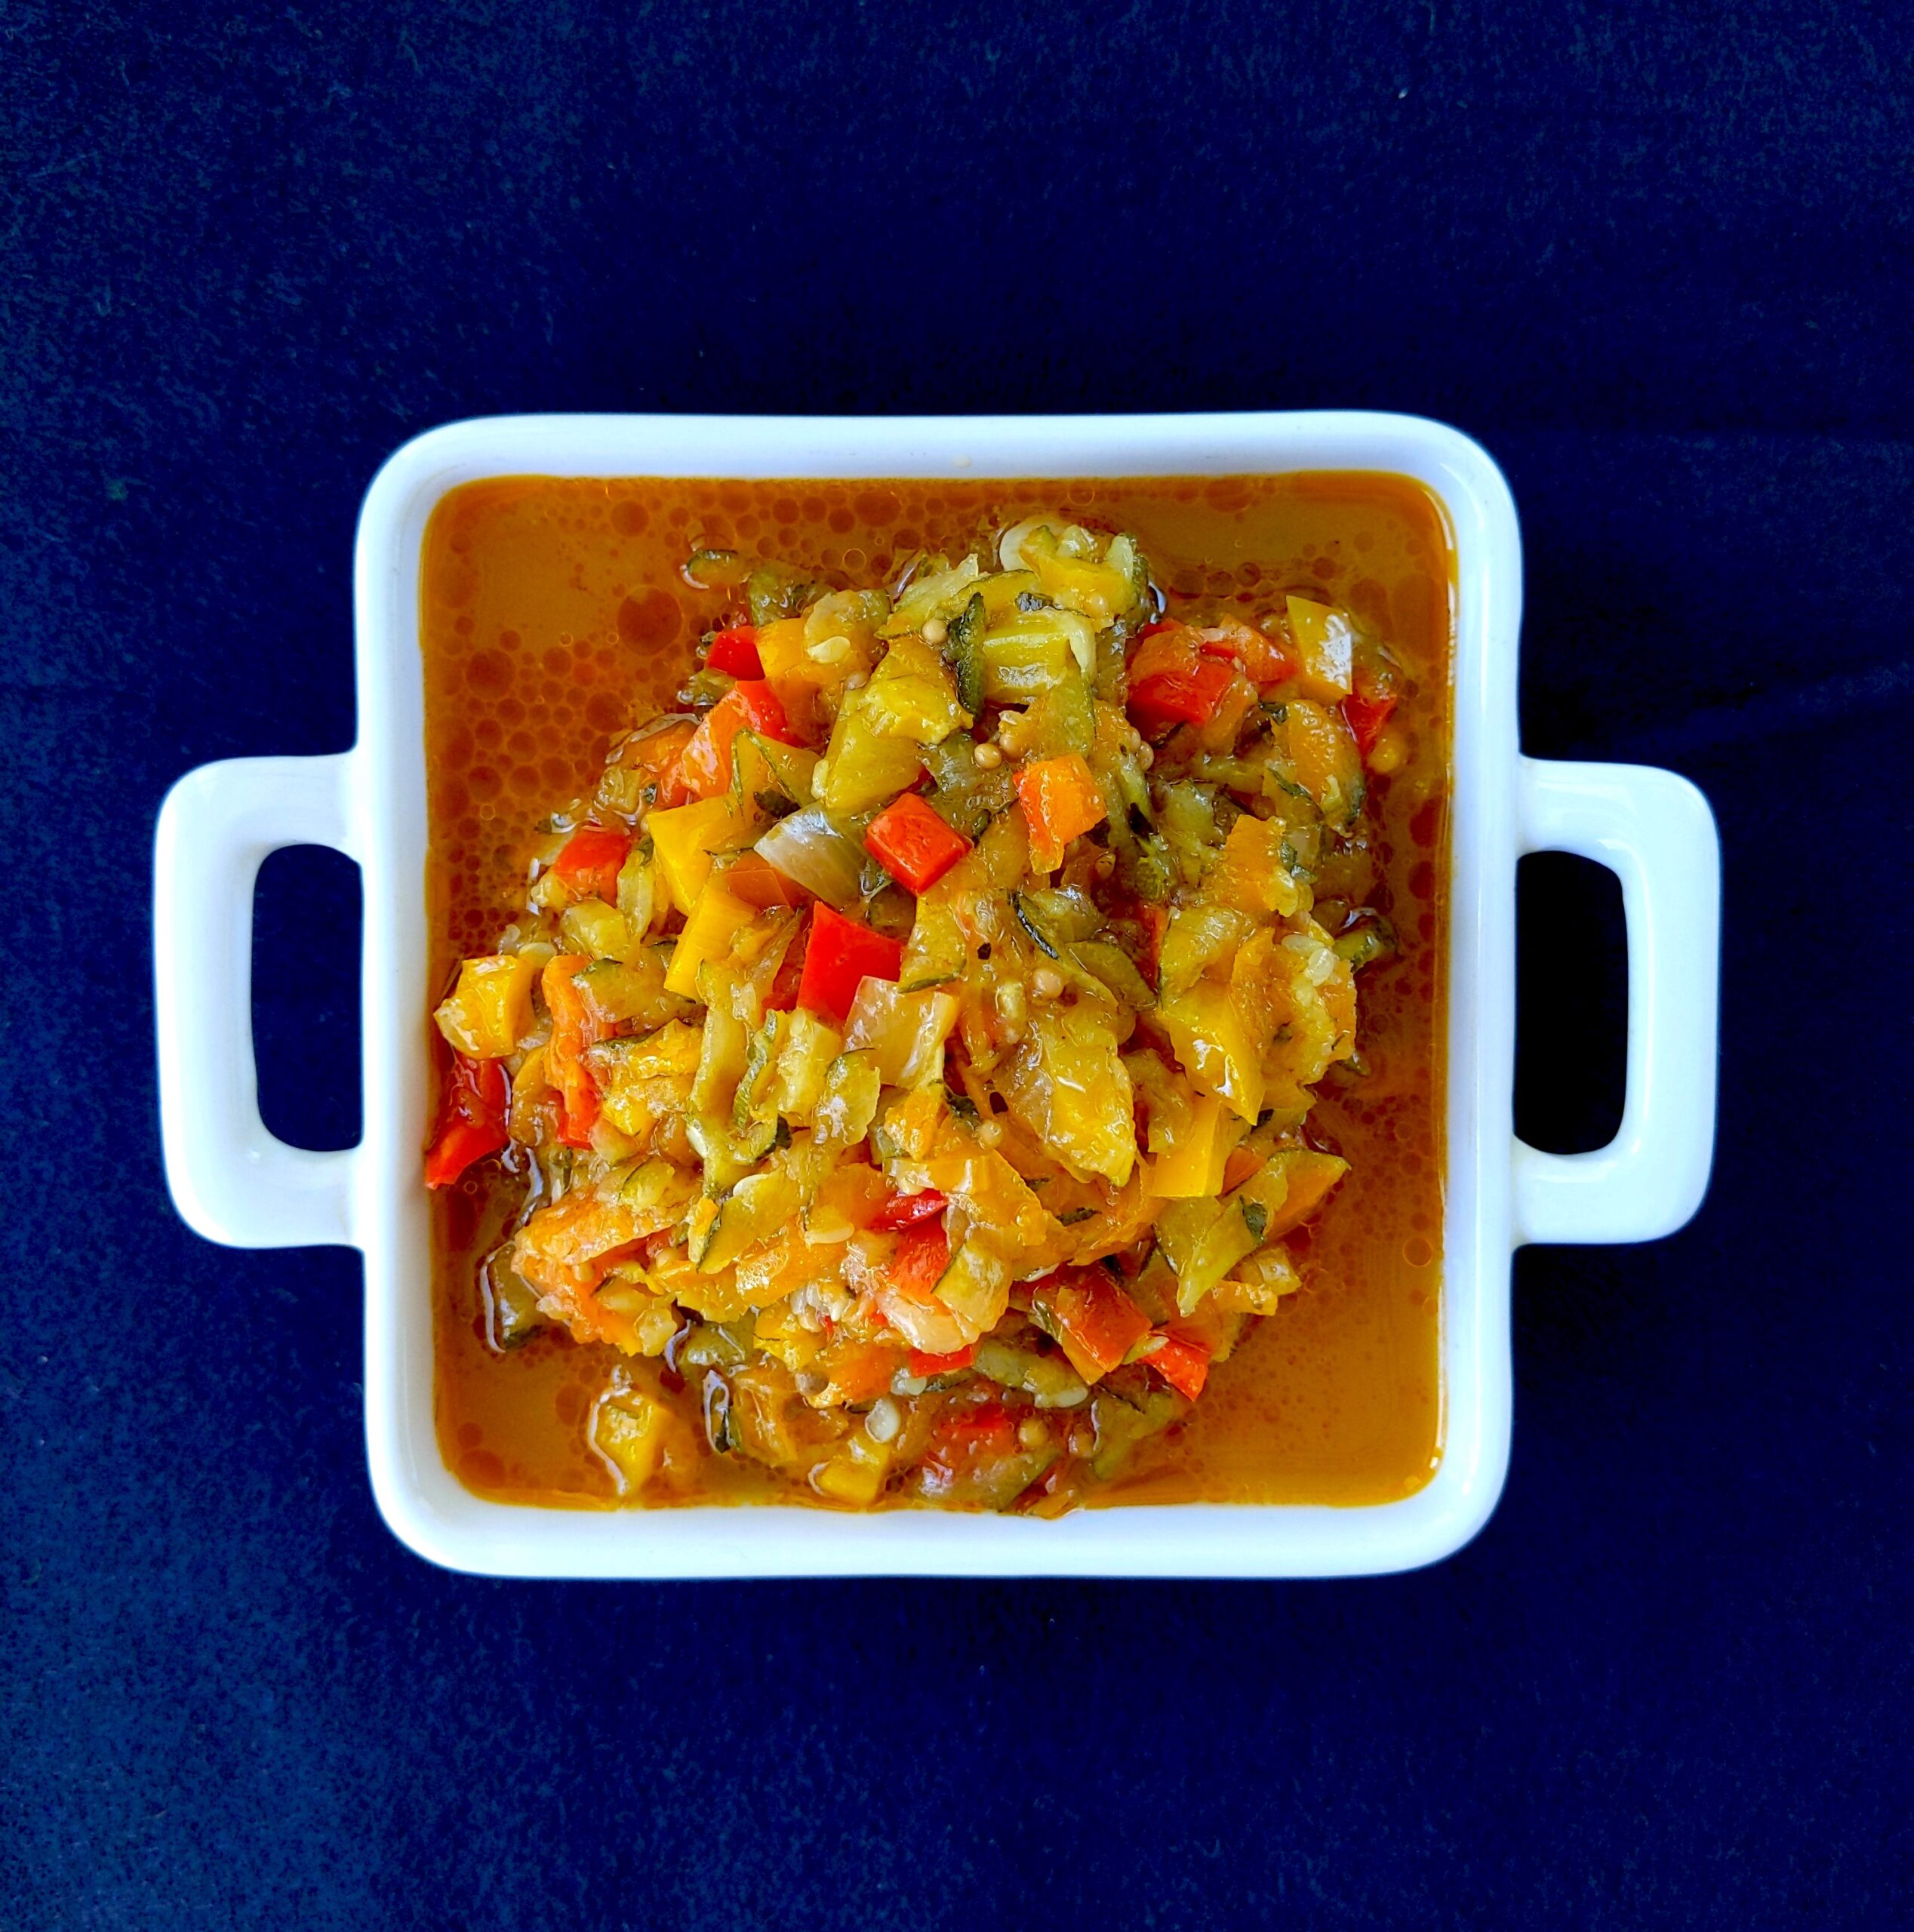 Zucchini relish in a white square dish on a maroown background